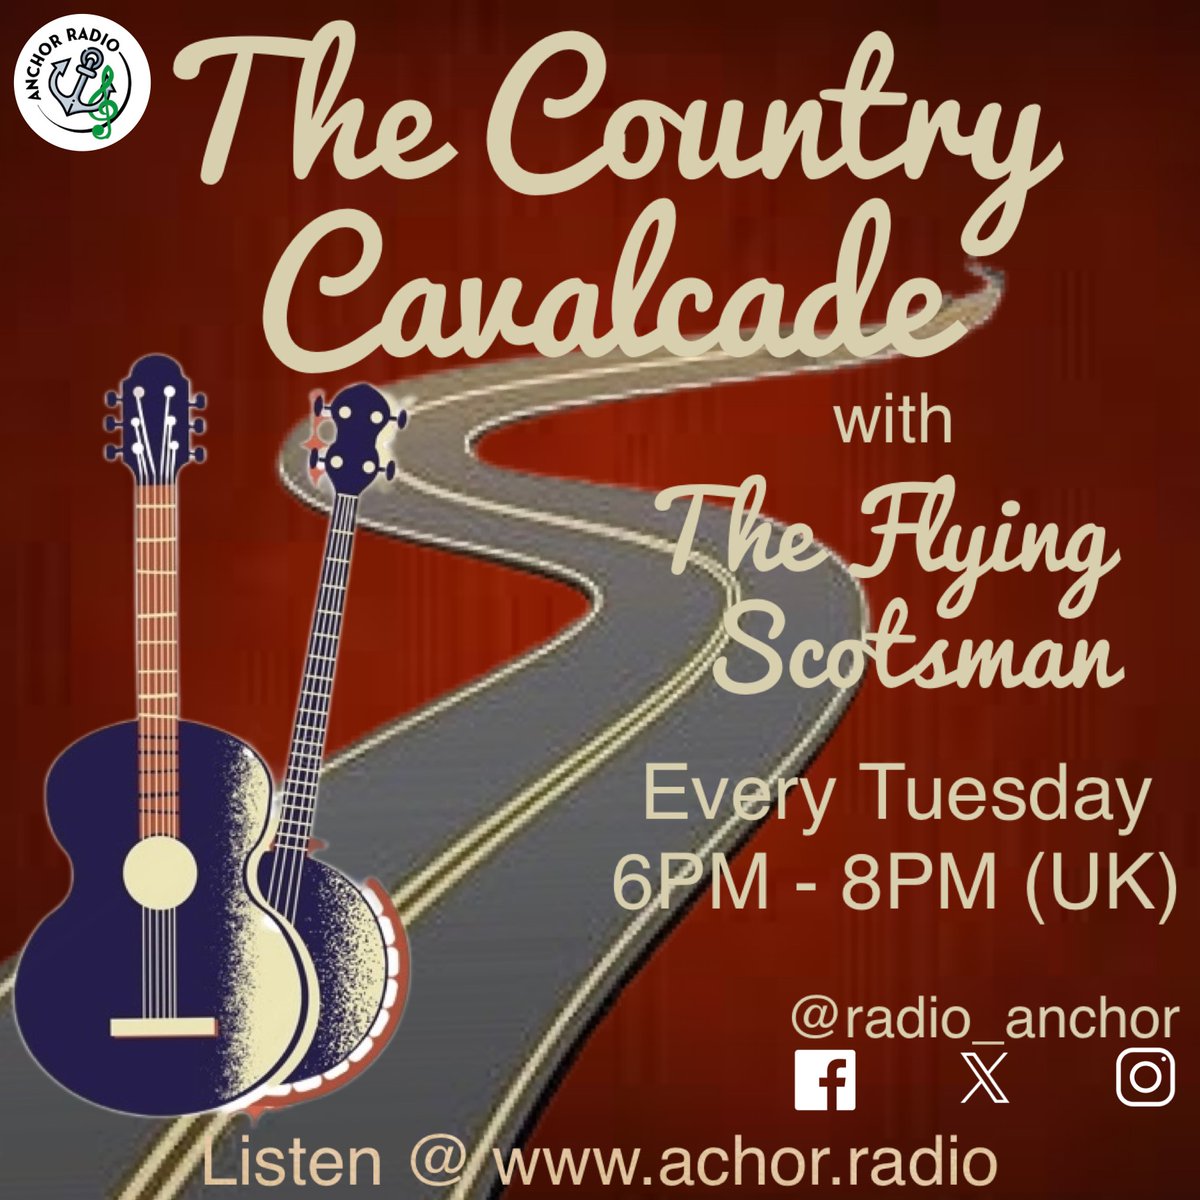 Oh Drat and Bother! Hang Spring Cleaning! After such an amazing show with Victoria why not stay tuned to Anchor Radio for The Country Cavalcade with The Flying Scotsman. Tune in at anchor.radio or ask your digital assistant to enable Anchor Radio Skill.